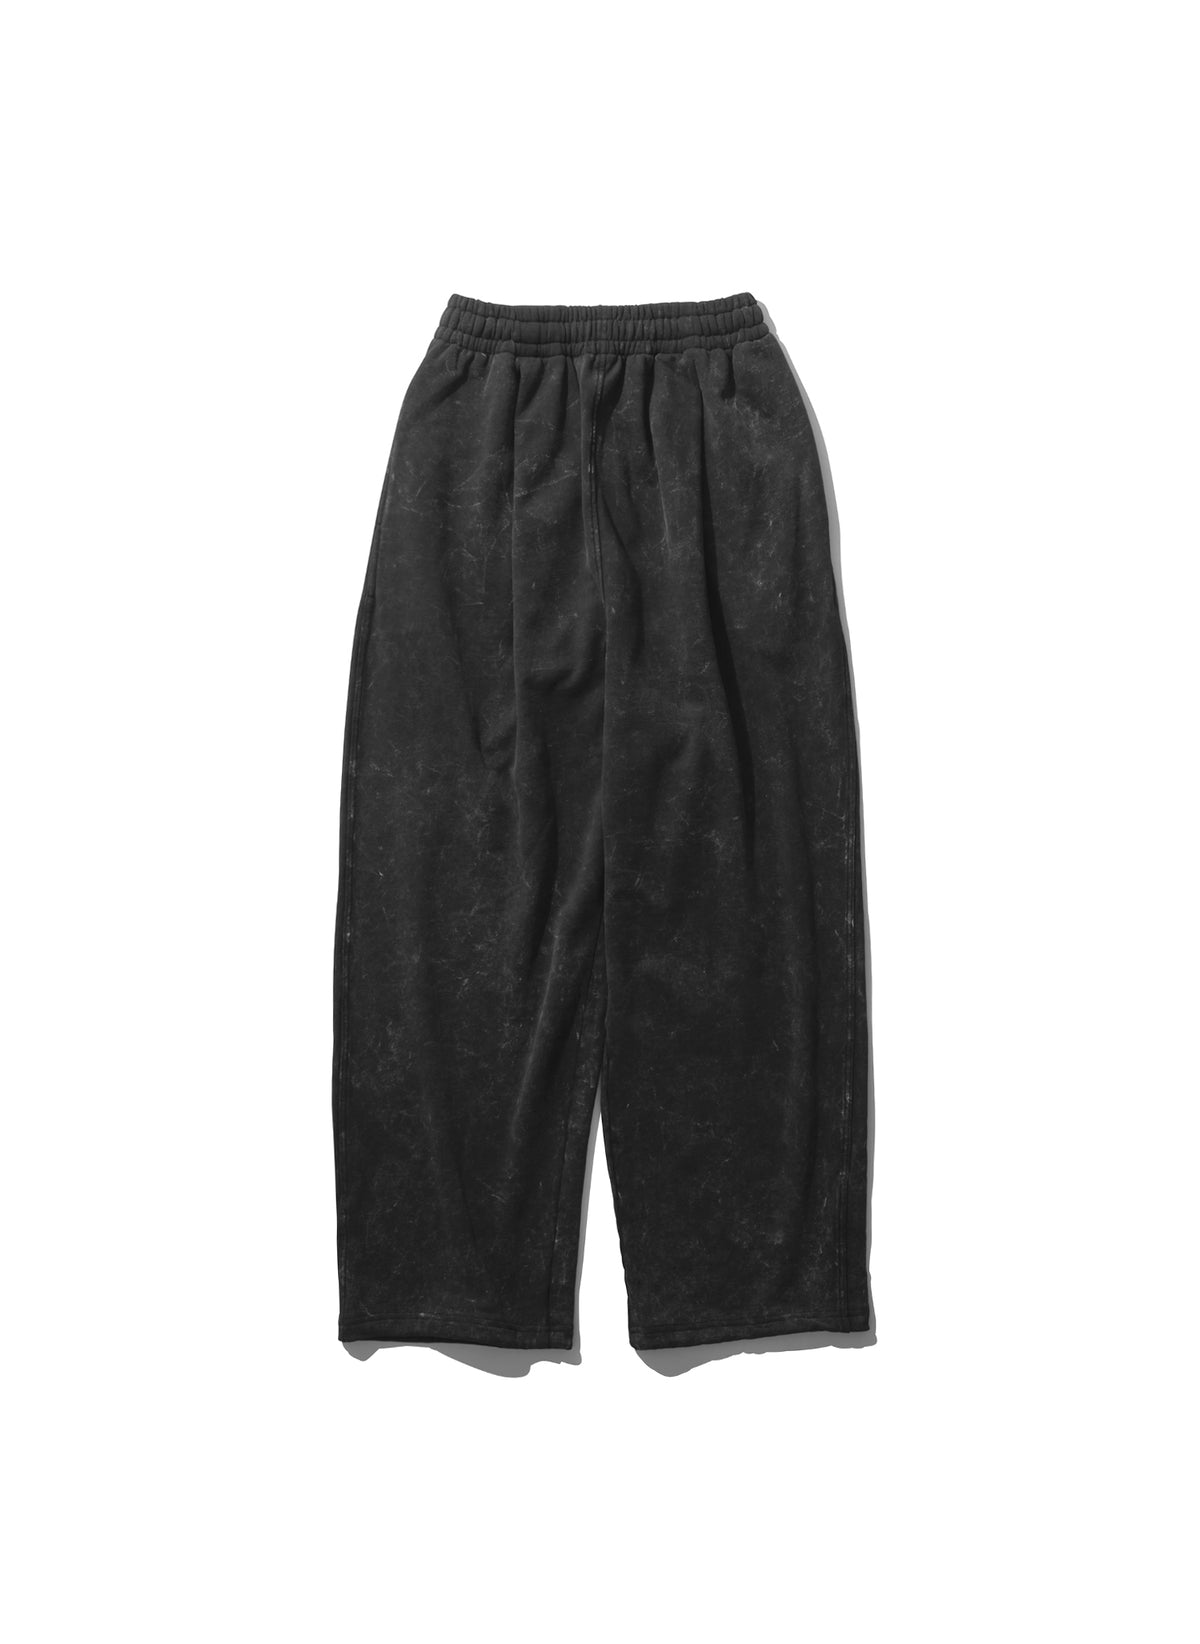 WILLY CHAVARRIA / NORTHSIDER JOGGER PANTS WASHED BLACK